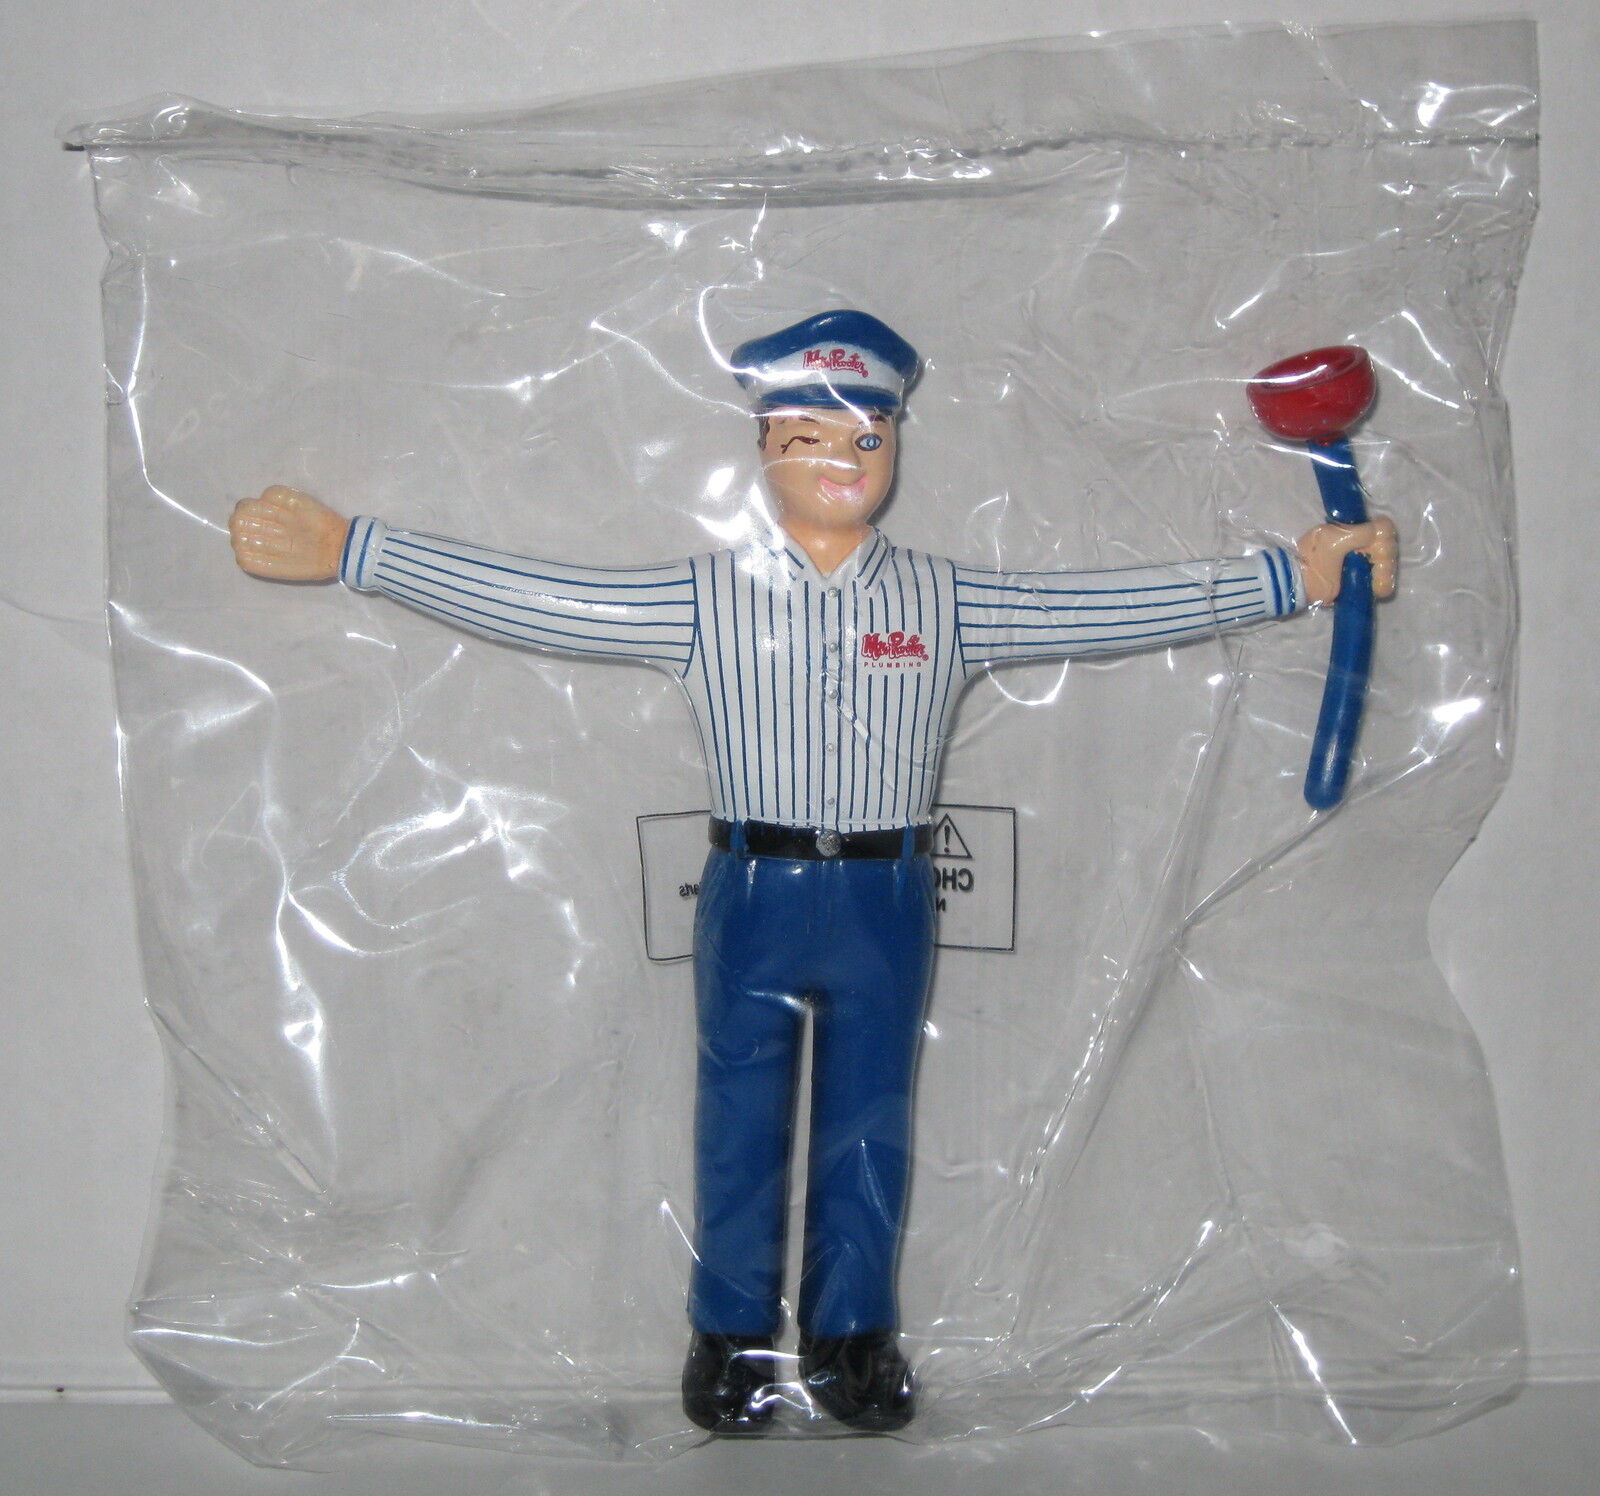 New Mr. Rooter Handyman Man Plumber Bendable Action Figure with Plunger Sealed